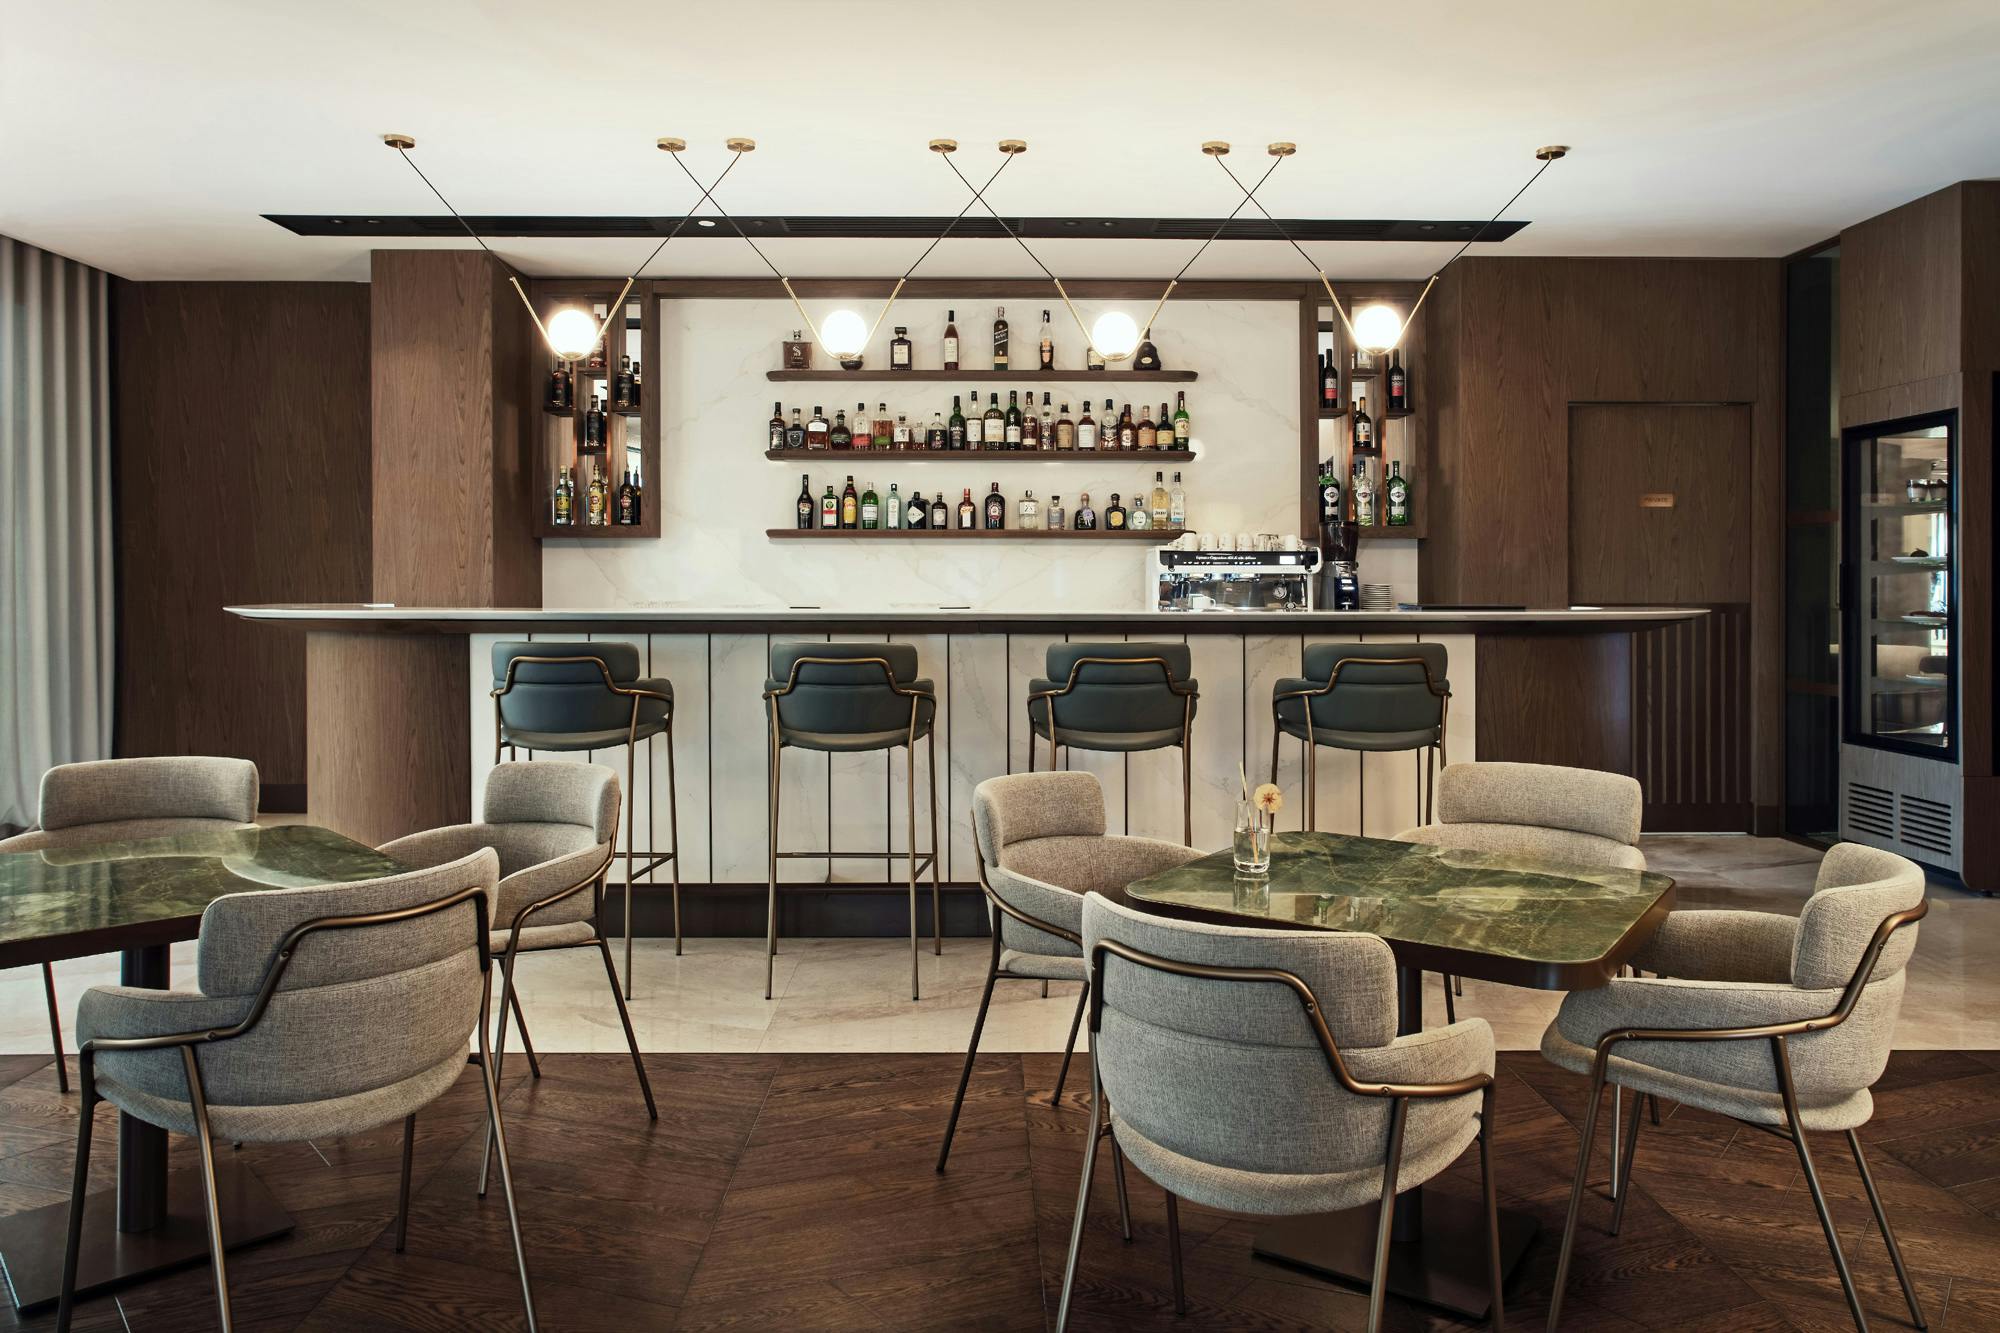 Numéro d'image 49 de la section actuelle de A century old building gets a new lease of life as one of Oslo’s most vibrant hotels thanks to Silestone de Cosentino France